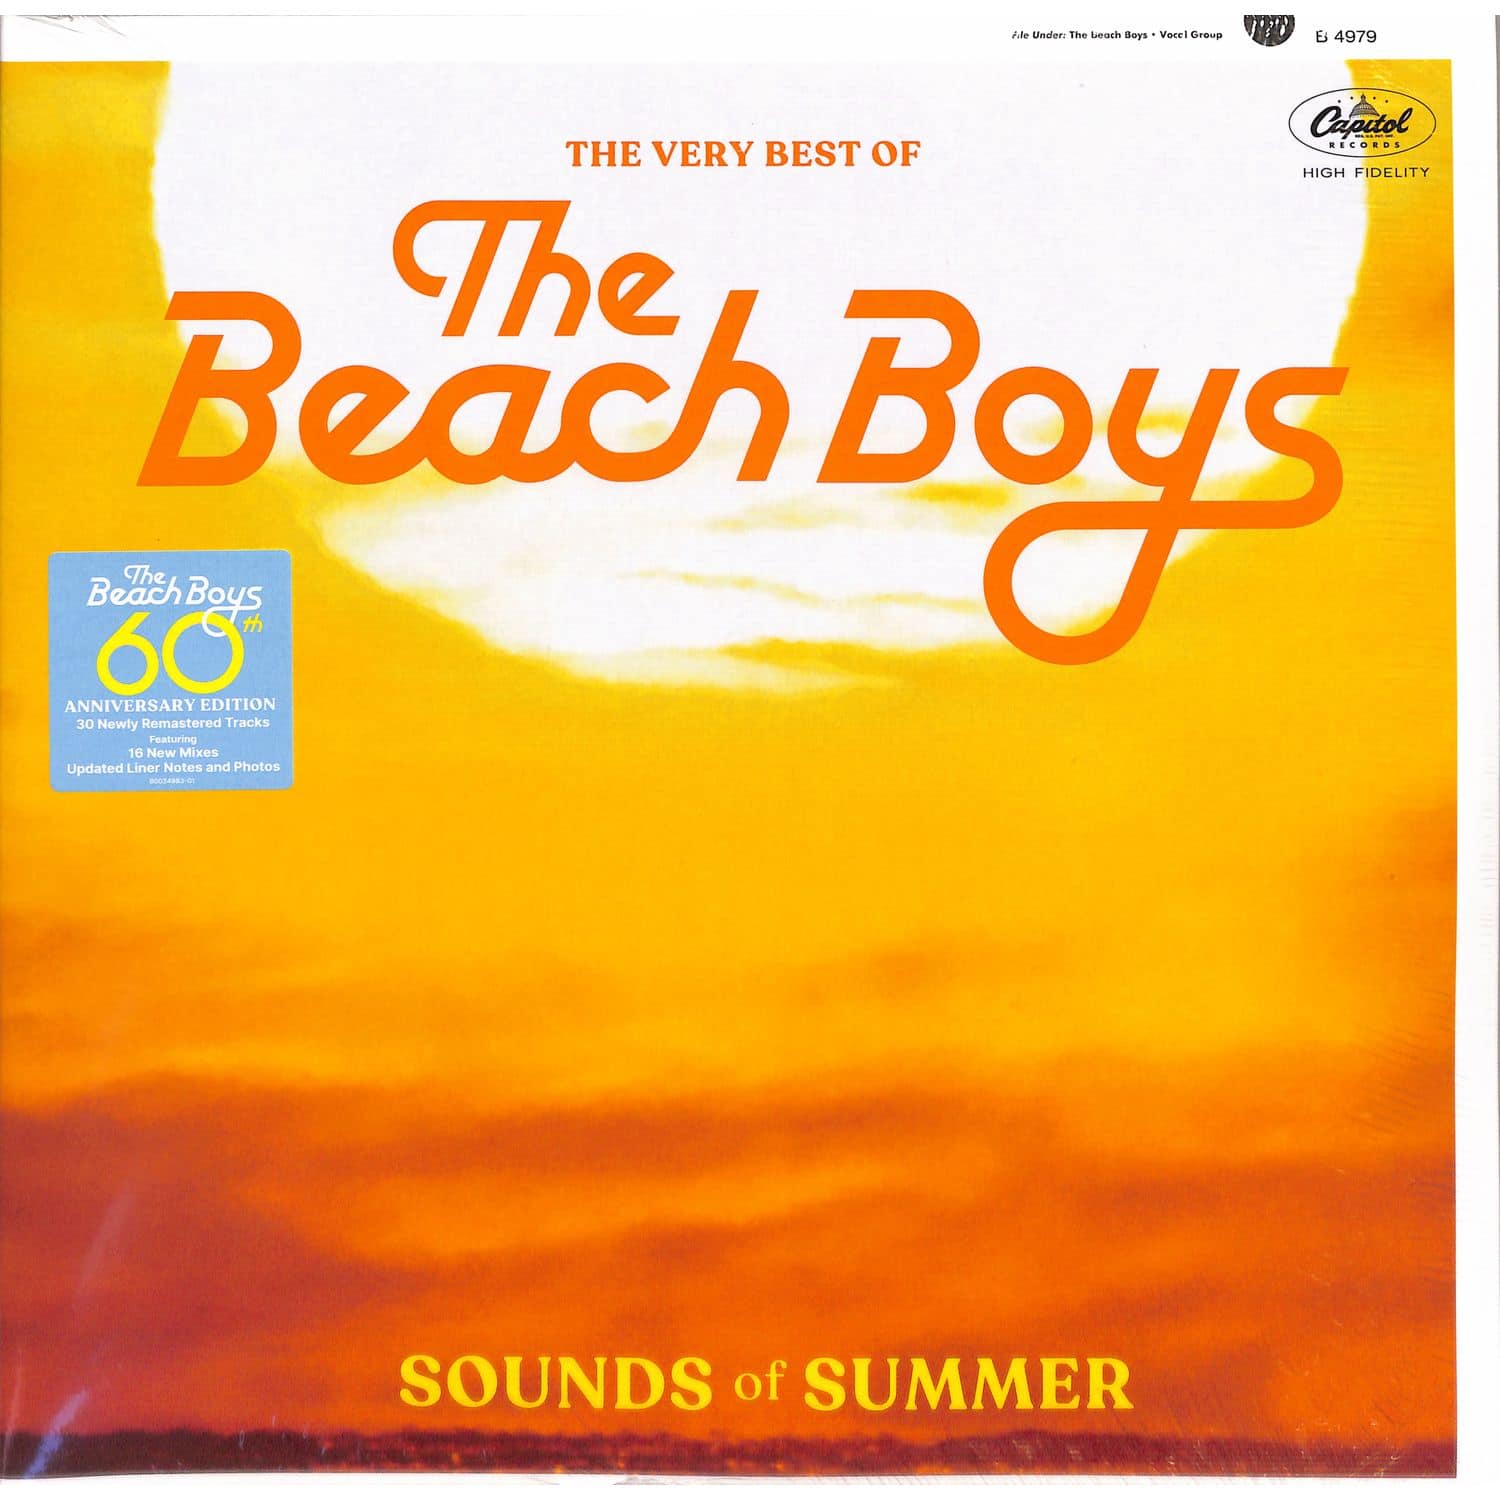 The Beach Boys - SOUNDS OF SUMMER - THE VERY BEST OF 